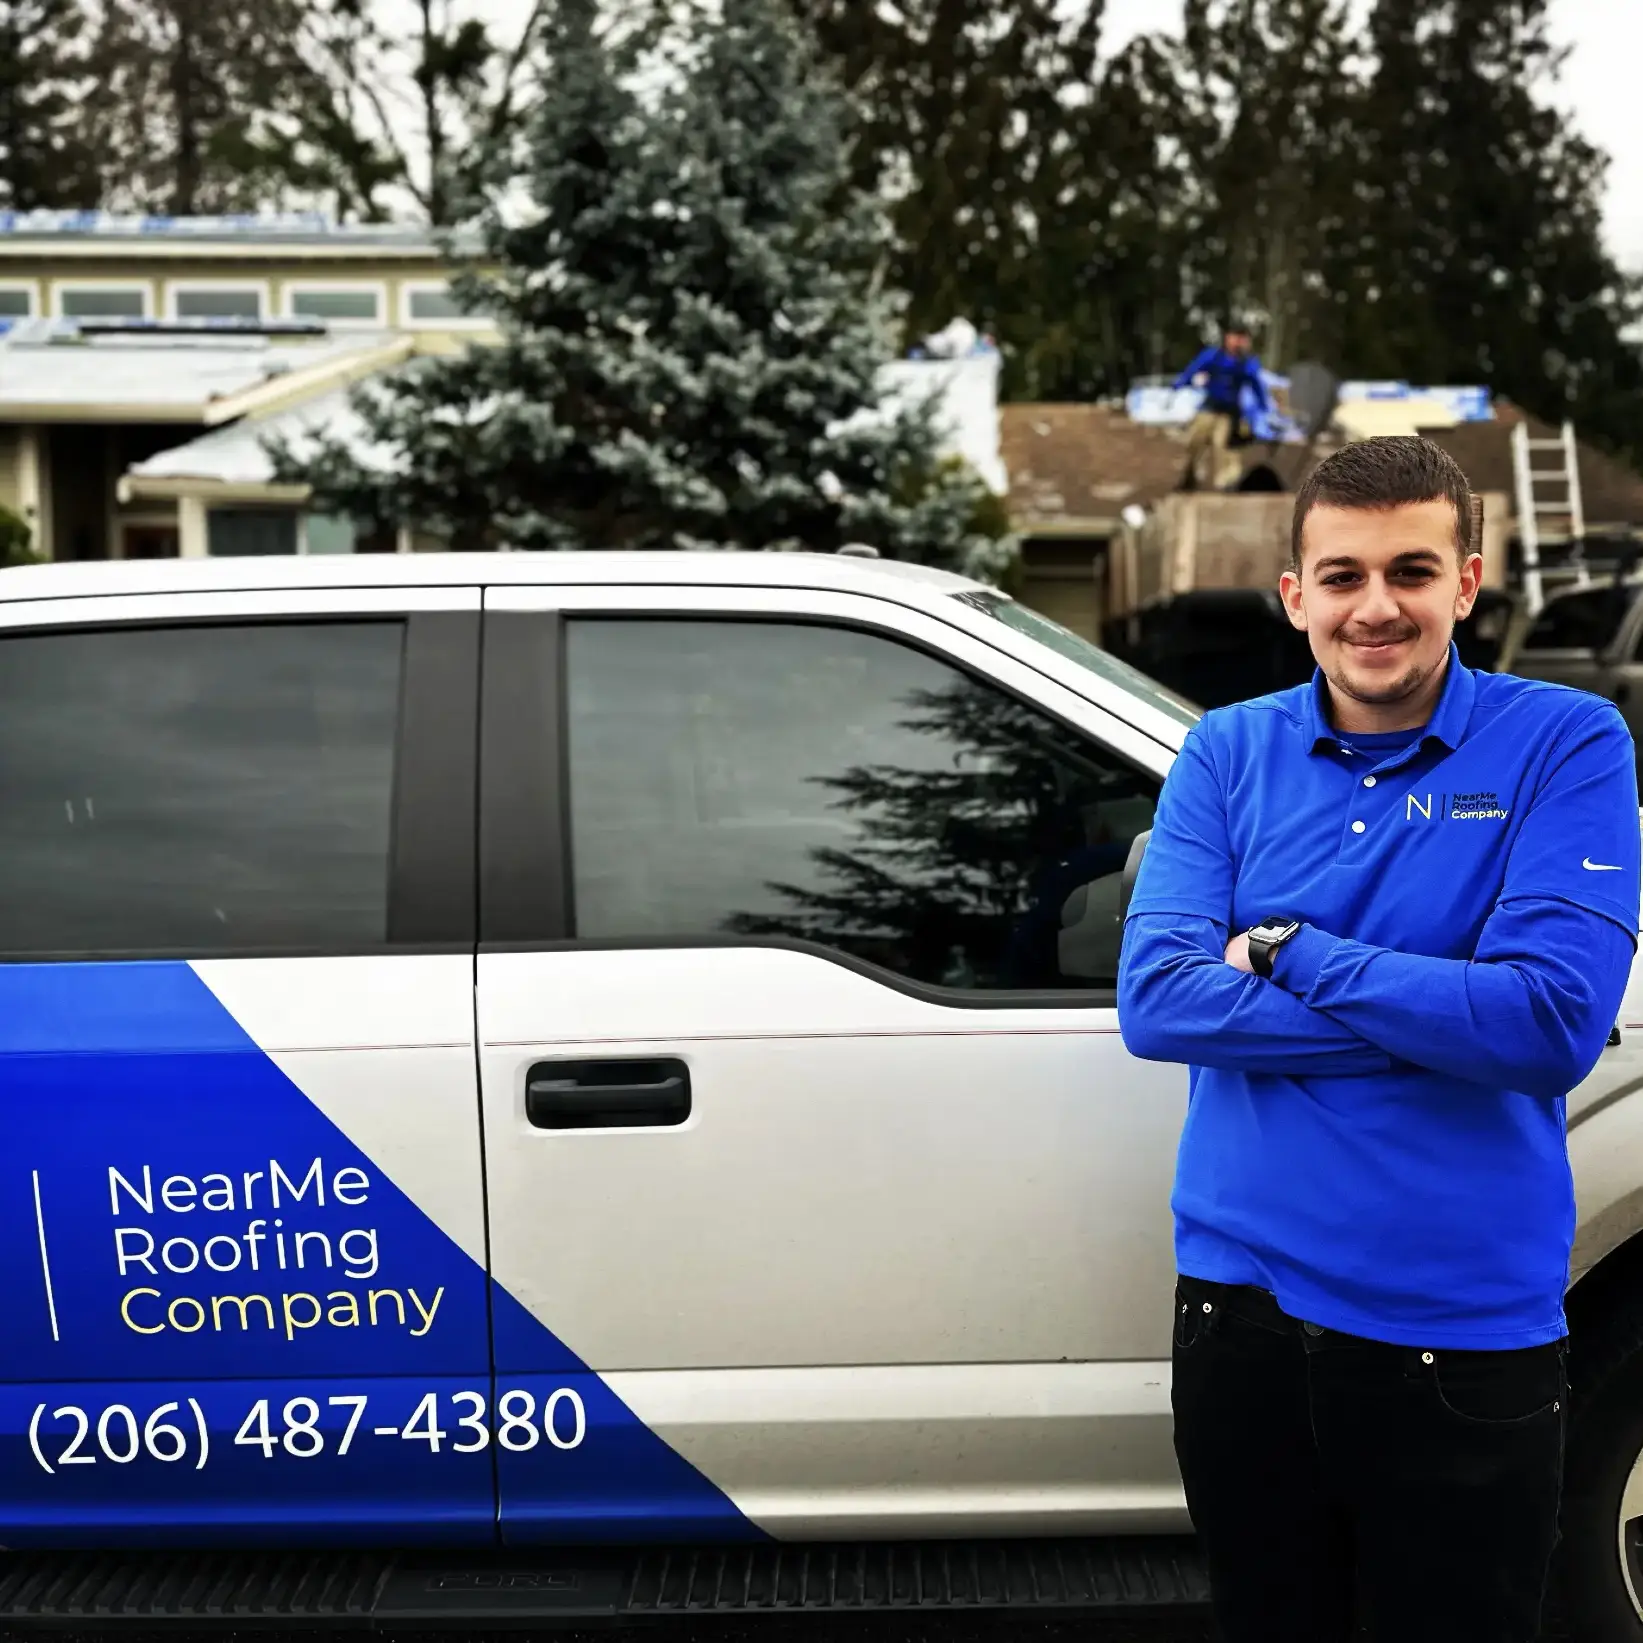 Roofing company Seattle near